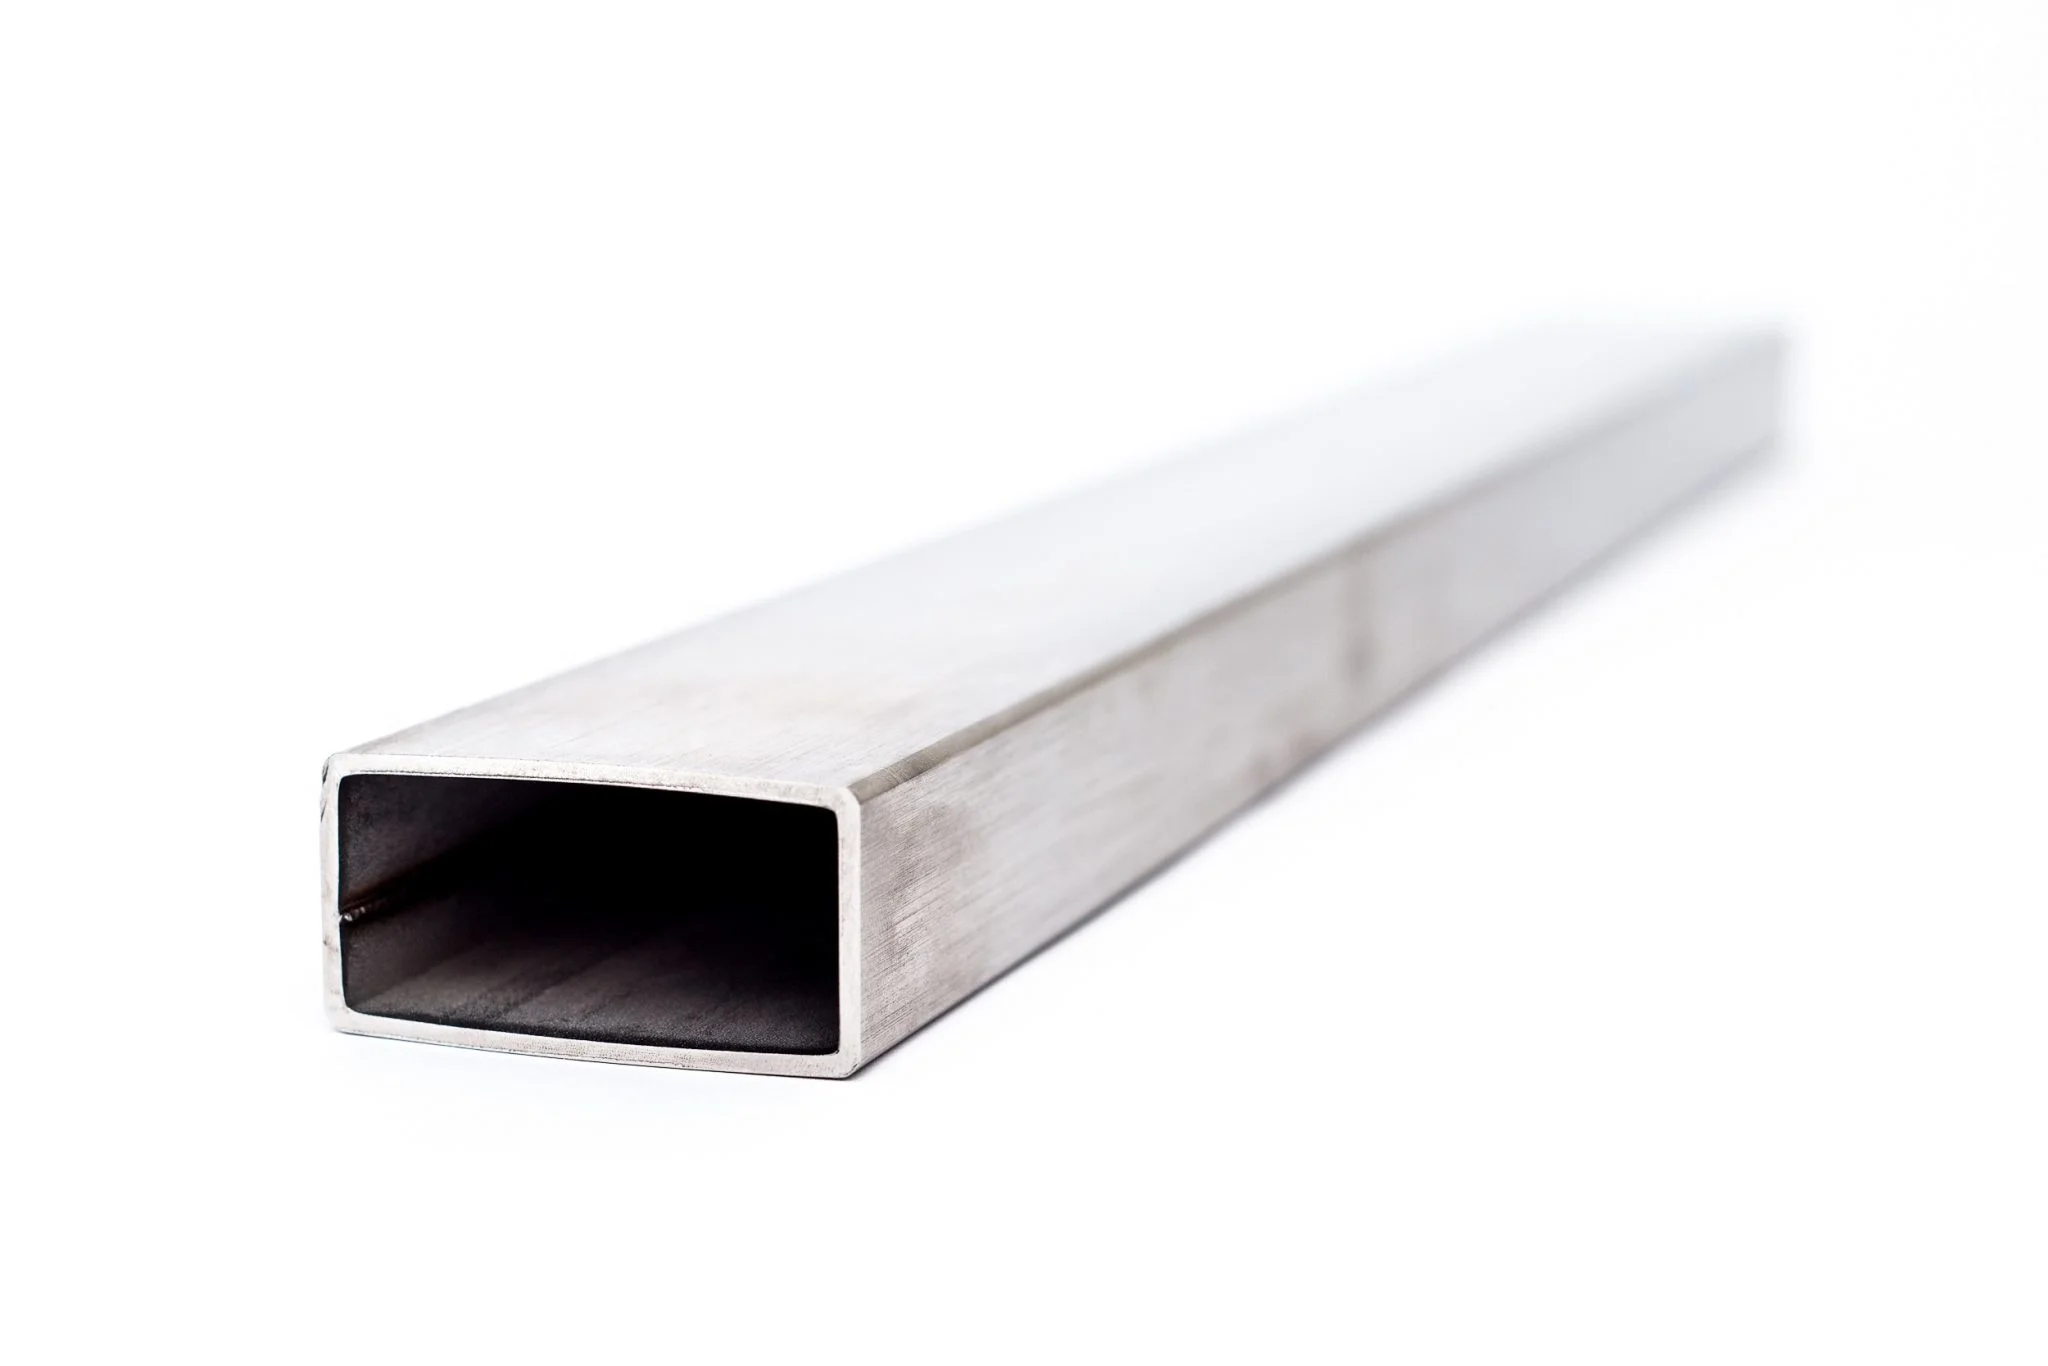 
Rectangular Construction Hollow Iron Stainless Steel /Carbon Steel Pipe Steel Tube 